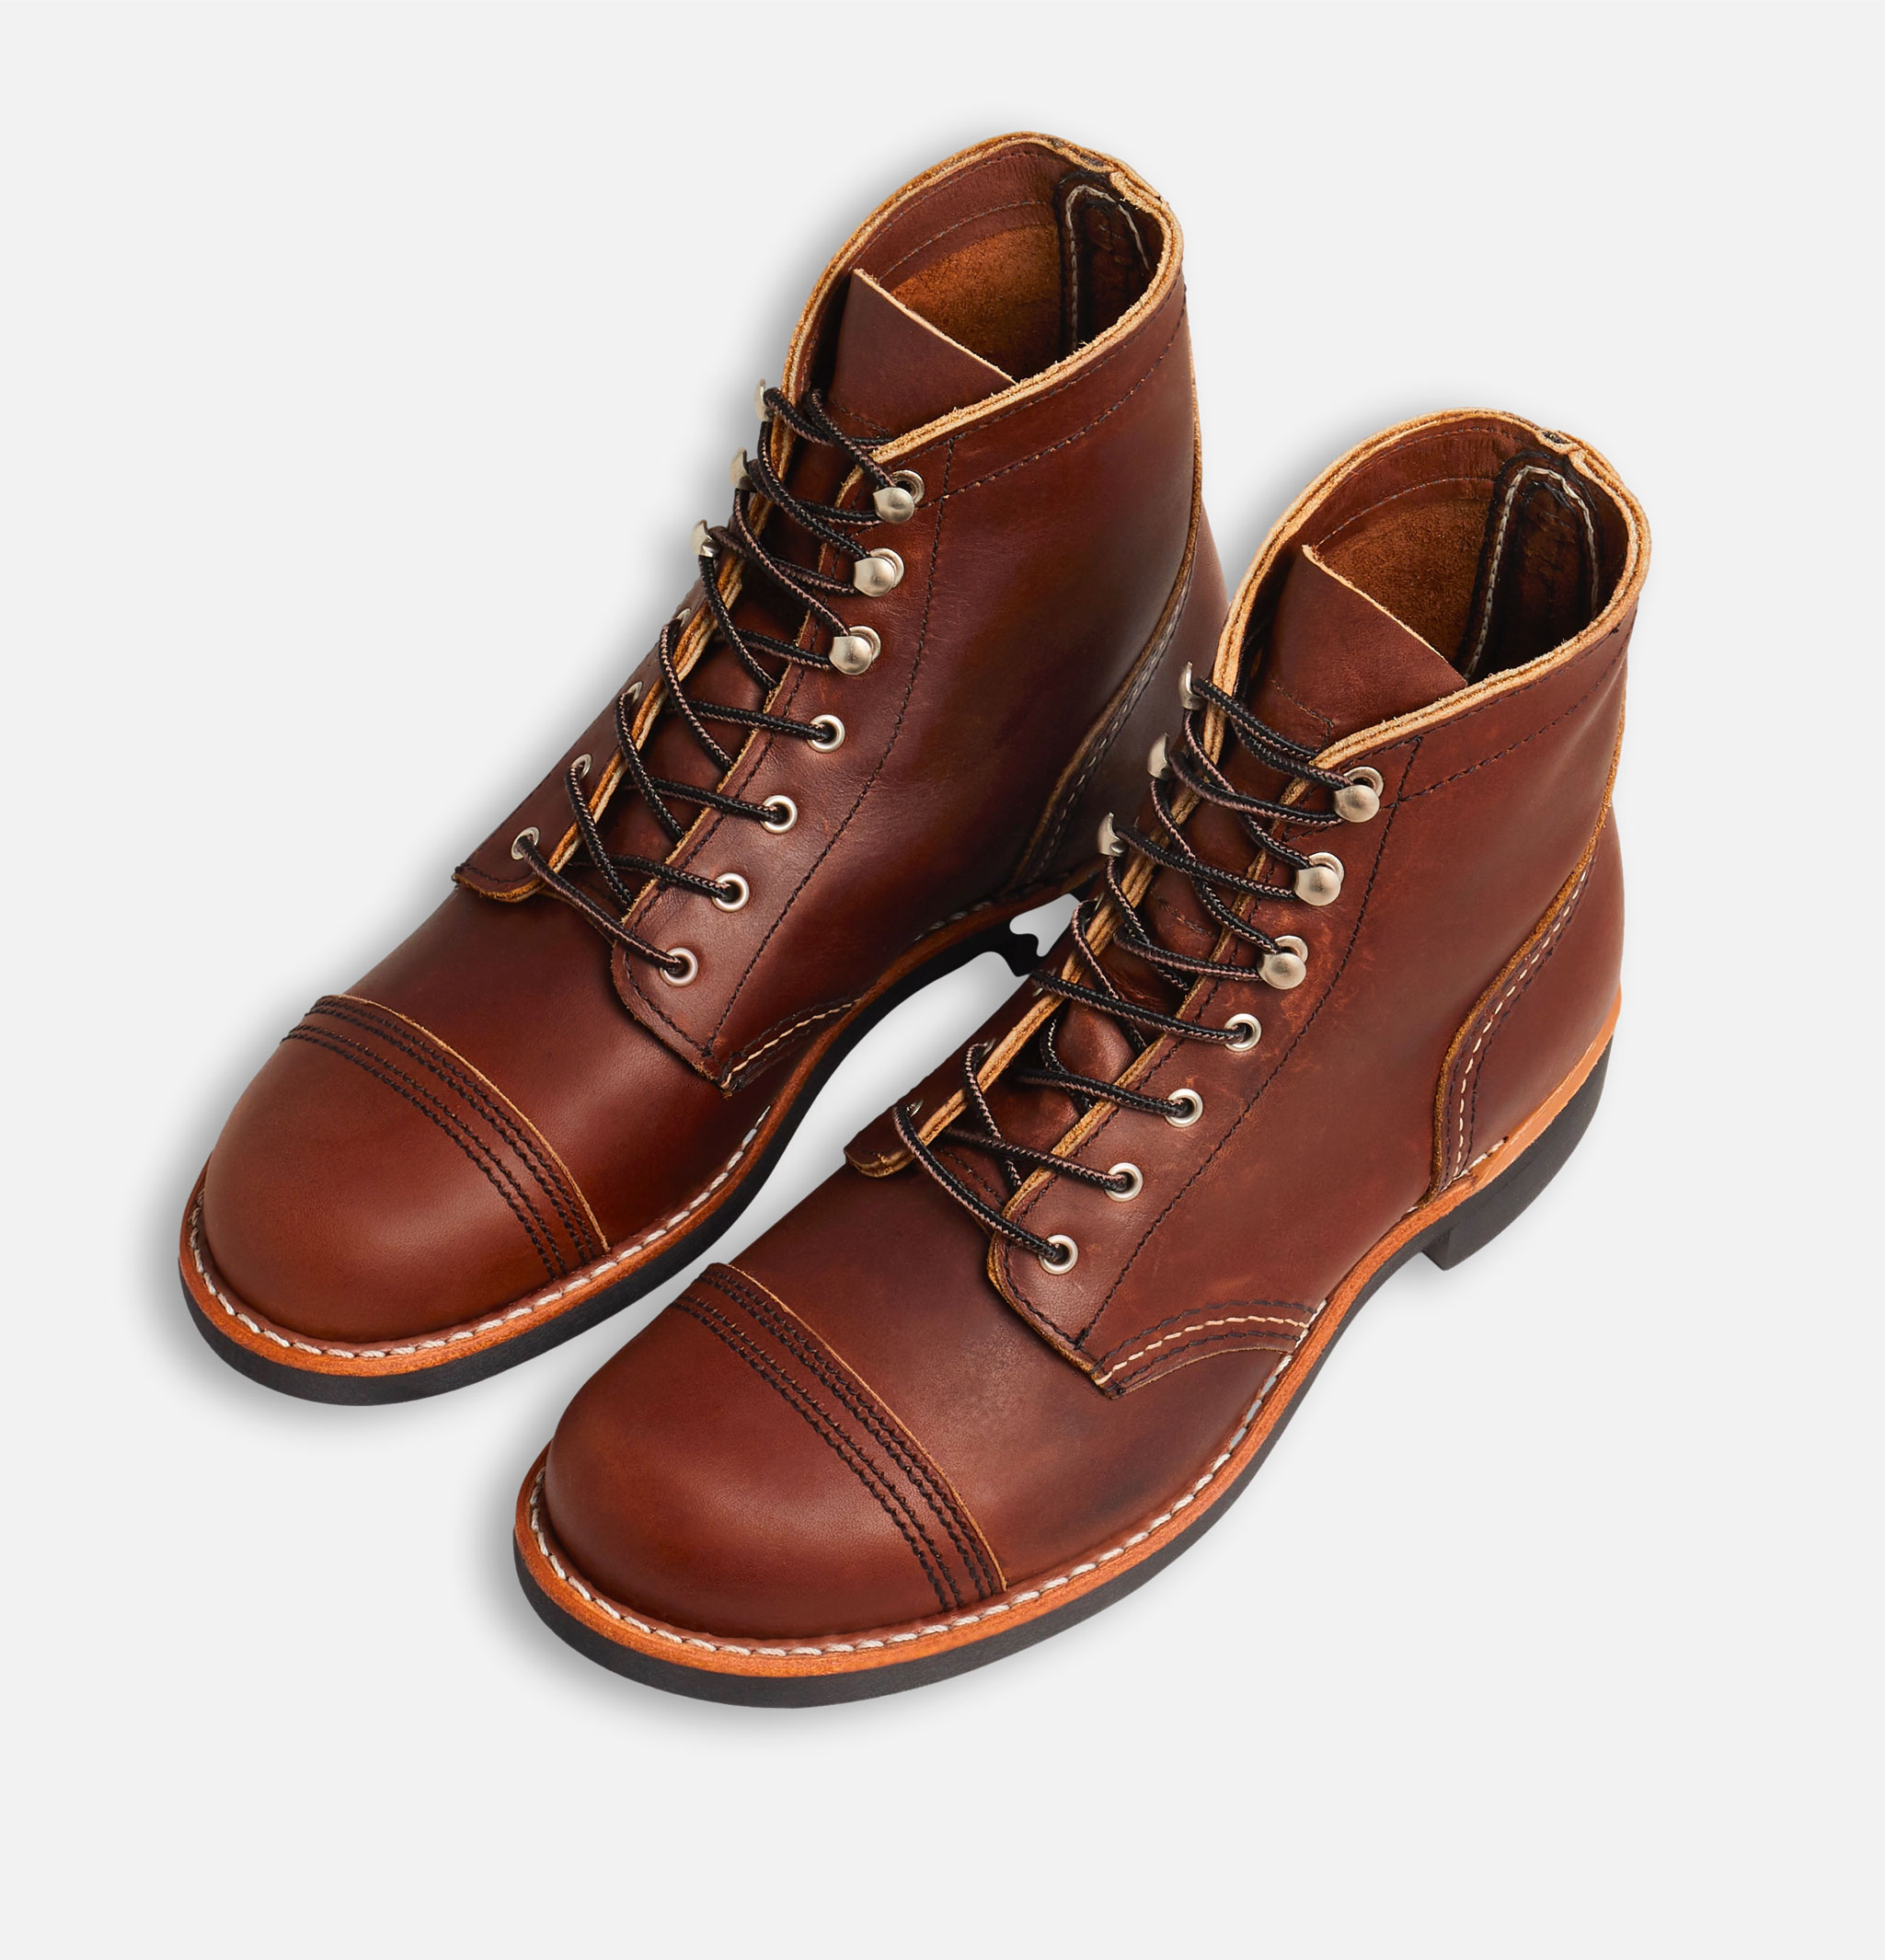 Red Wing Shoes Femme - 3365 - Iron Ranger Amber